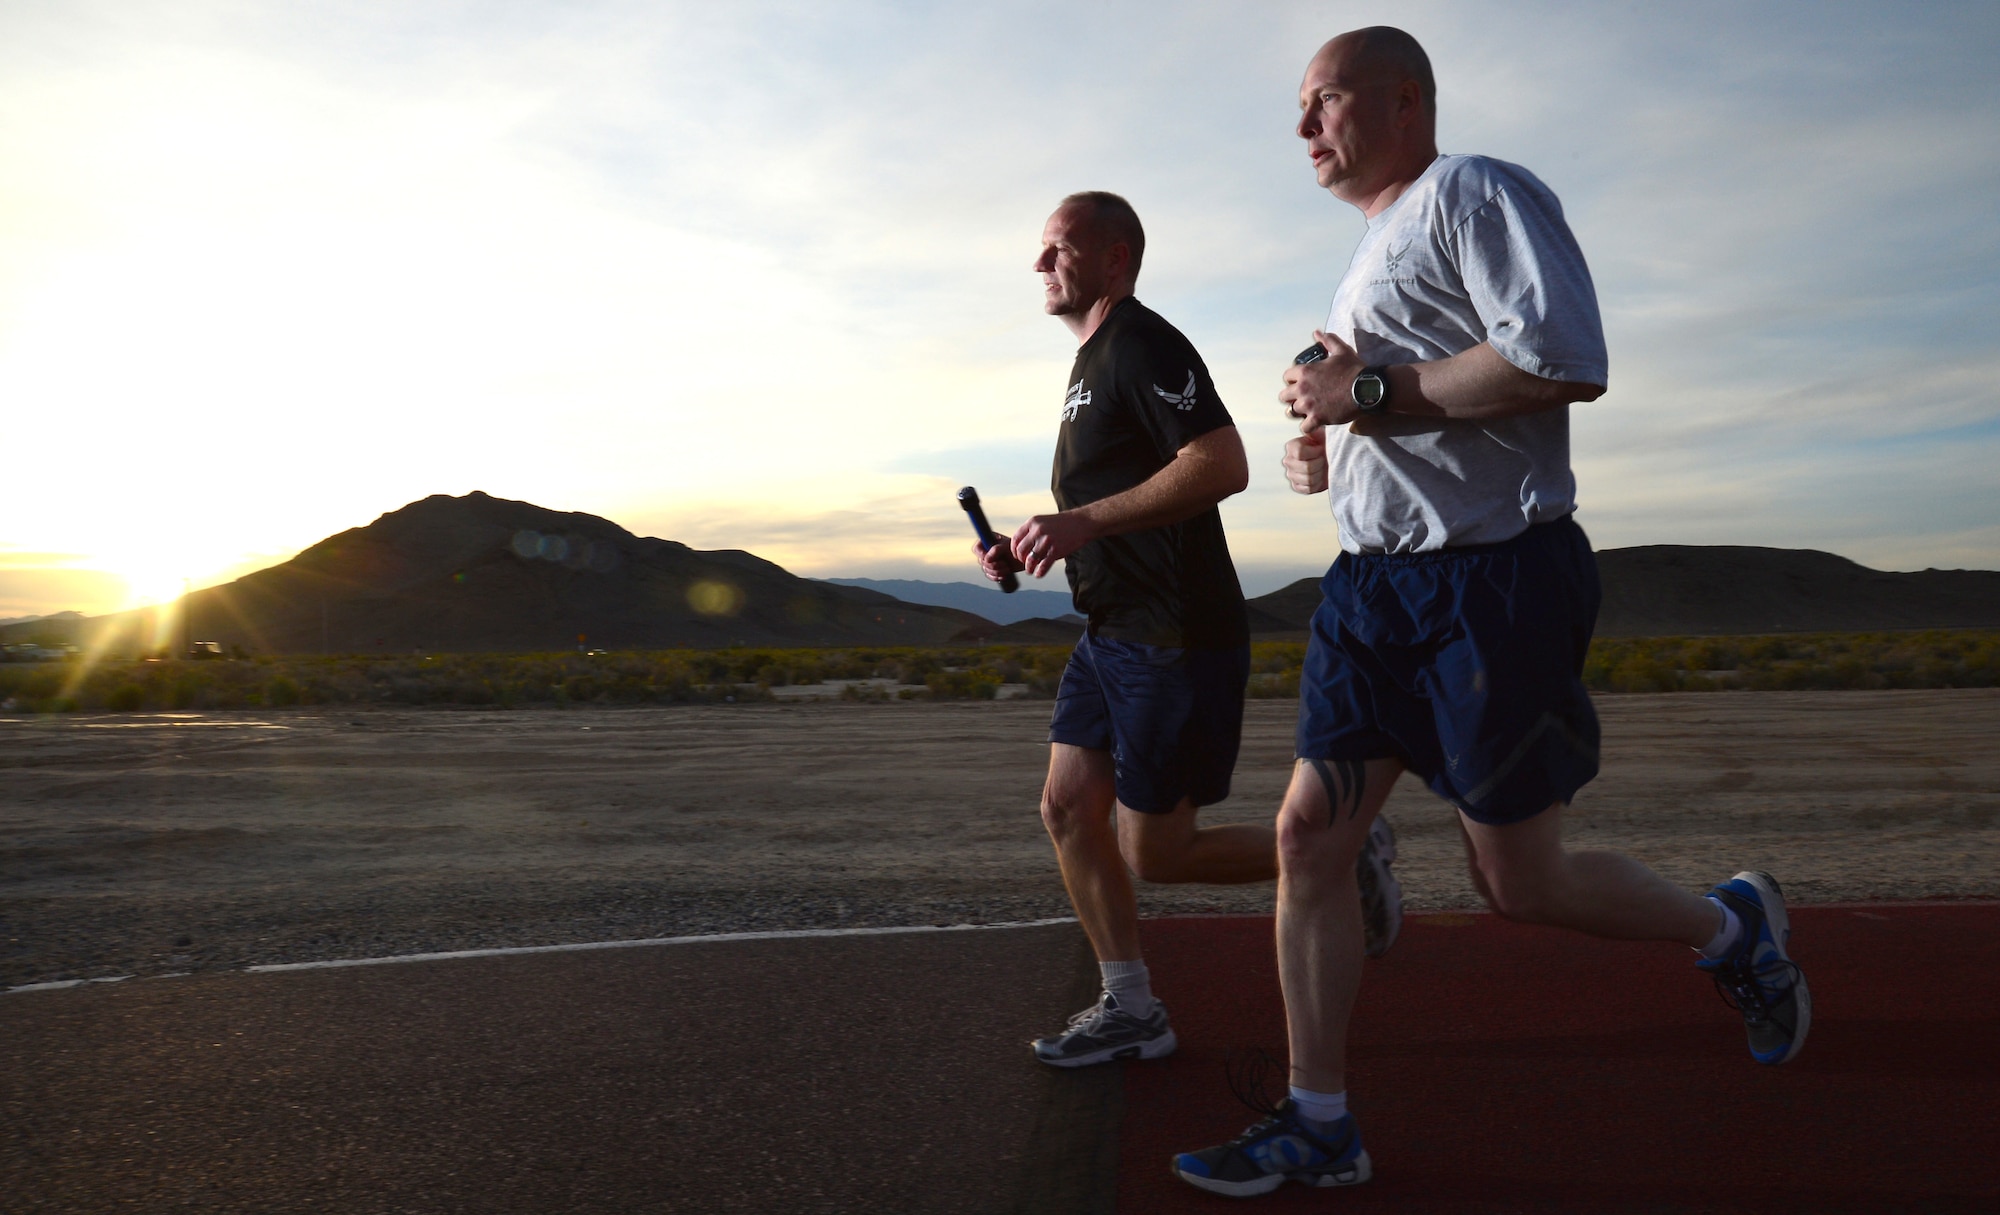 Chief Master Sgt. Paul Pohnert, left, 799th Air Base Squadron superintendent, and Master Sgt. Robert Livingston, 799th ABS first sergeant, participate in a 24-hour vigil run at Creech Air Force Base, Nev., during National Police Week May 16, 2014. Each runner carried a baton containing the names of 286 U.S. law enforcement officers who lost their lives during the past year. (U.S. Air Force photo by Tech. Sgt. Shad Eidson/Released)